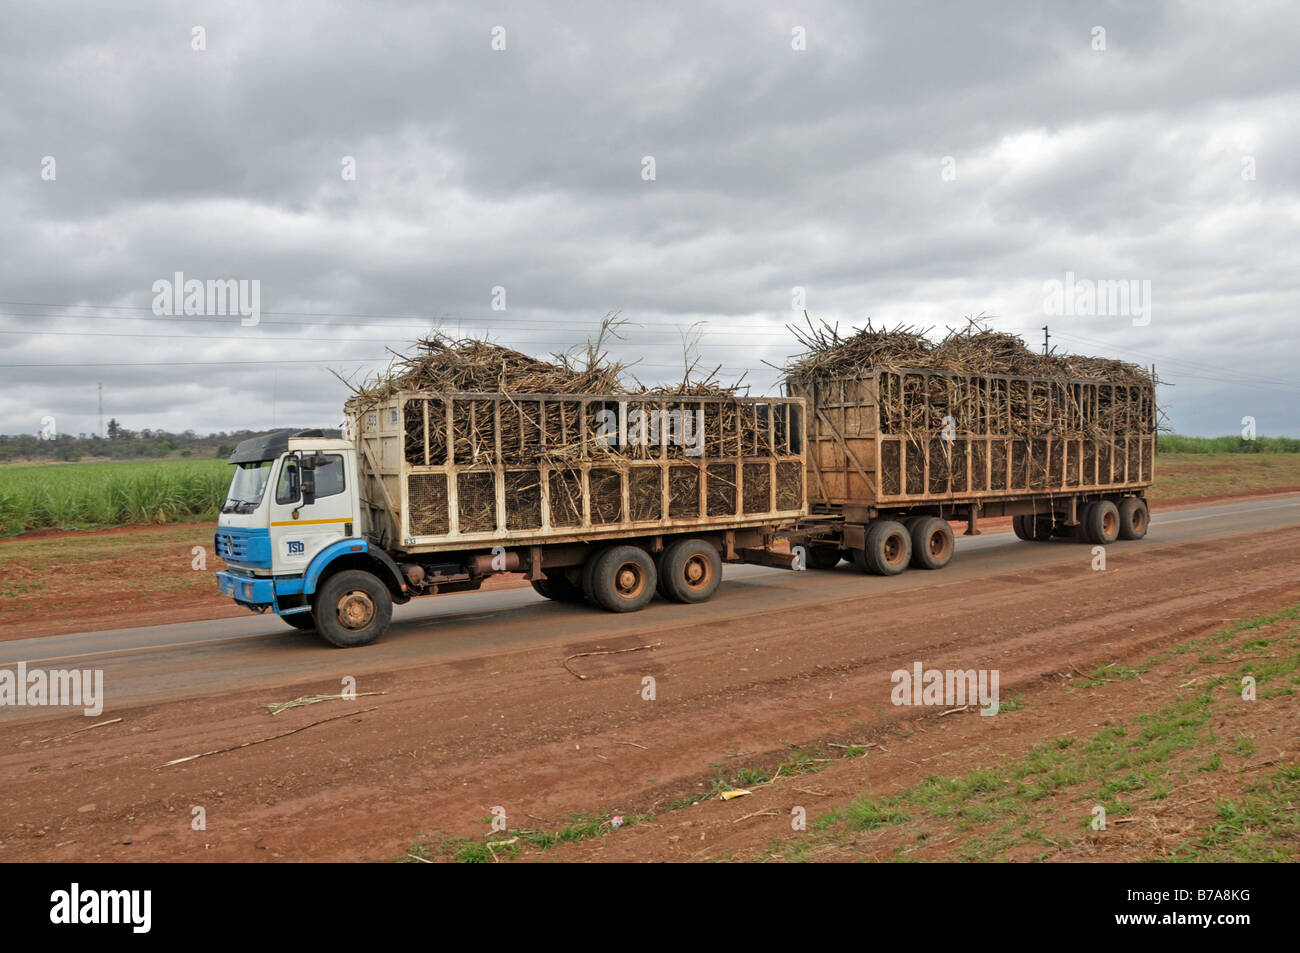 Lorry transporting sugar cane for ethanol and biodiesel production in Mpumalanga, South Africa, Africa Stock Photo